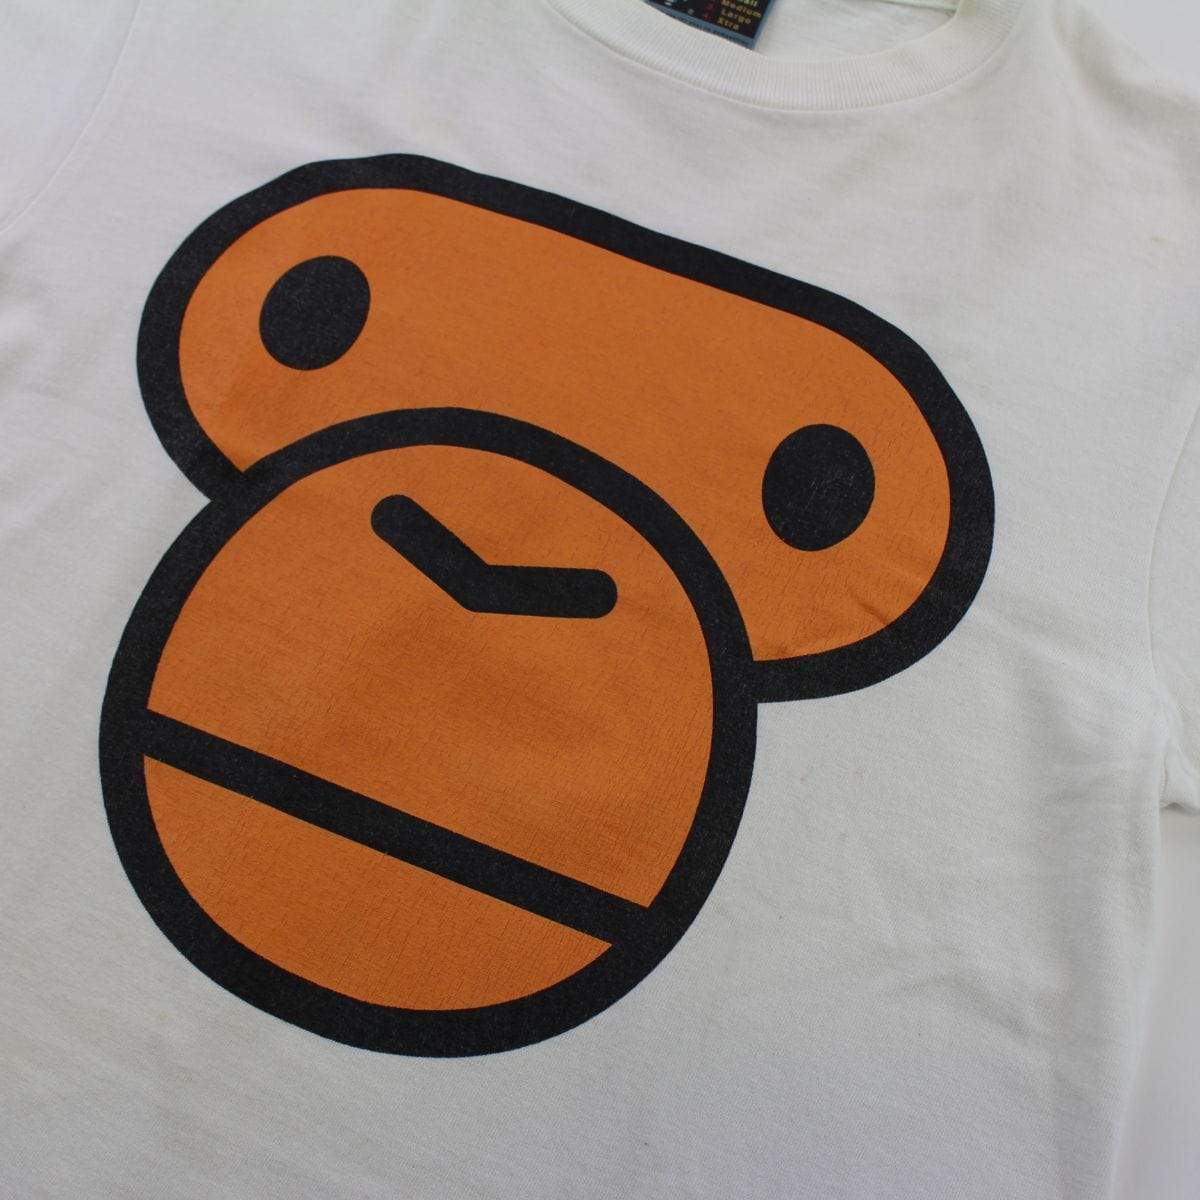 Bape Baby Milo Face Tee White - SaruGeneral